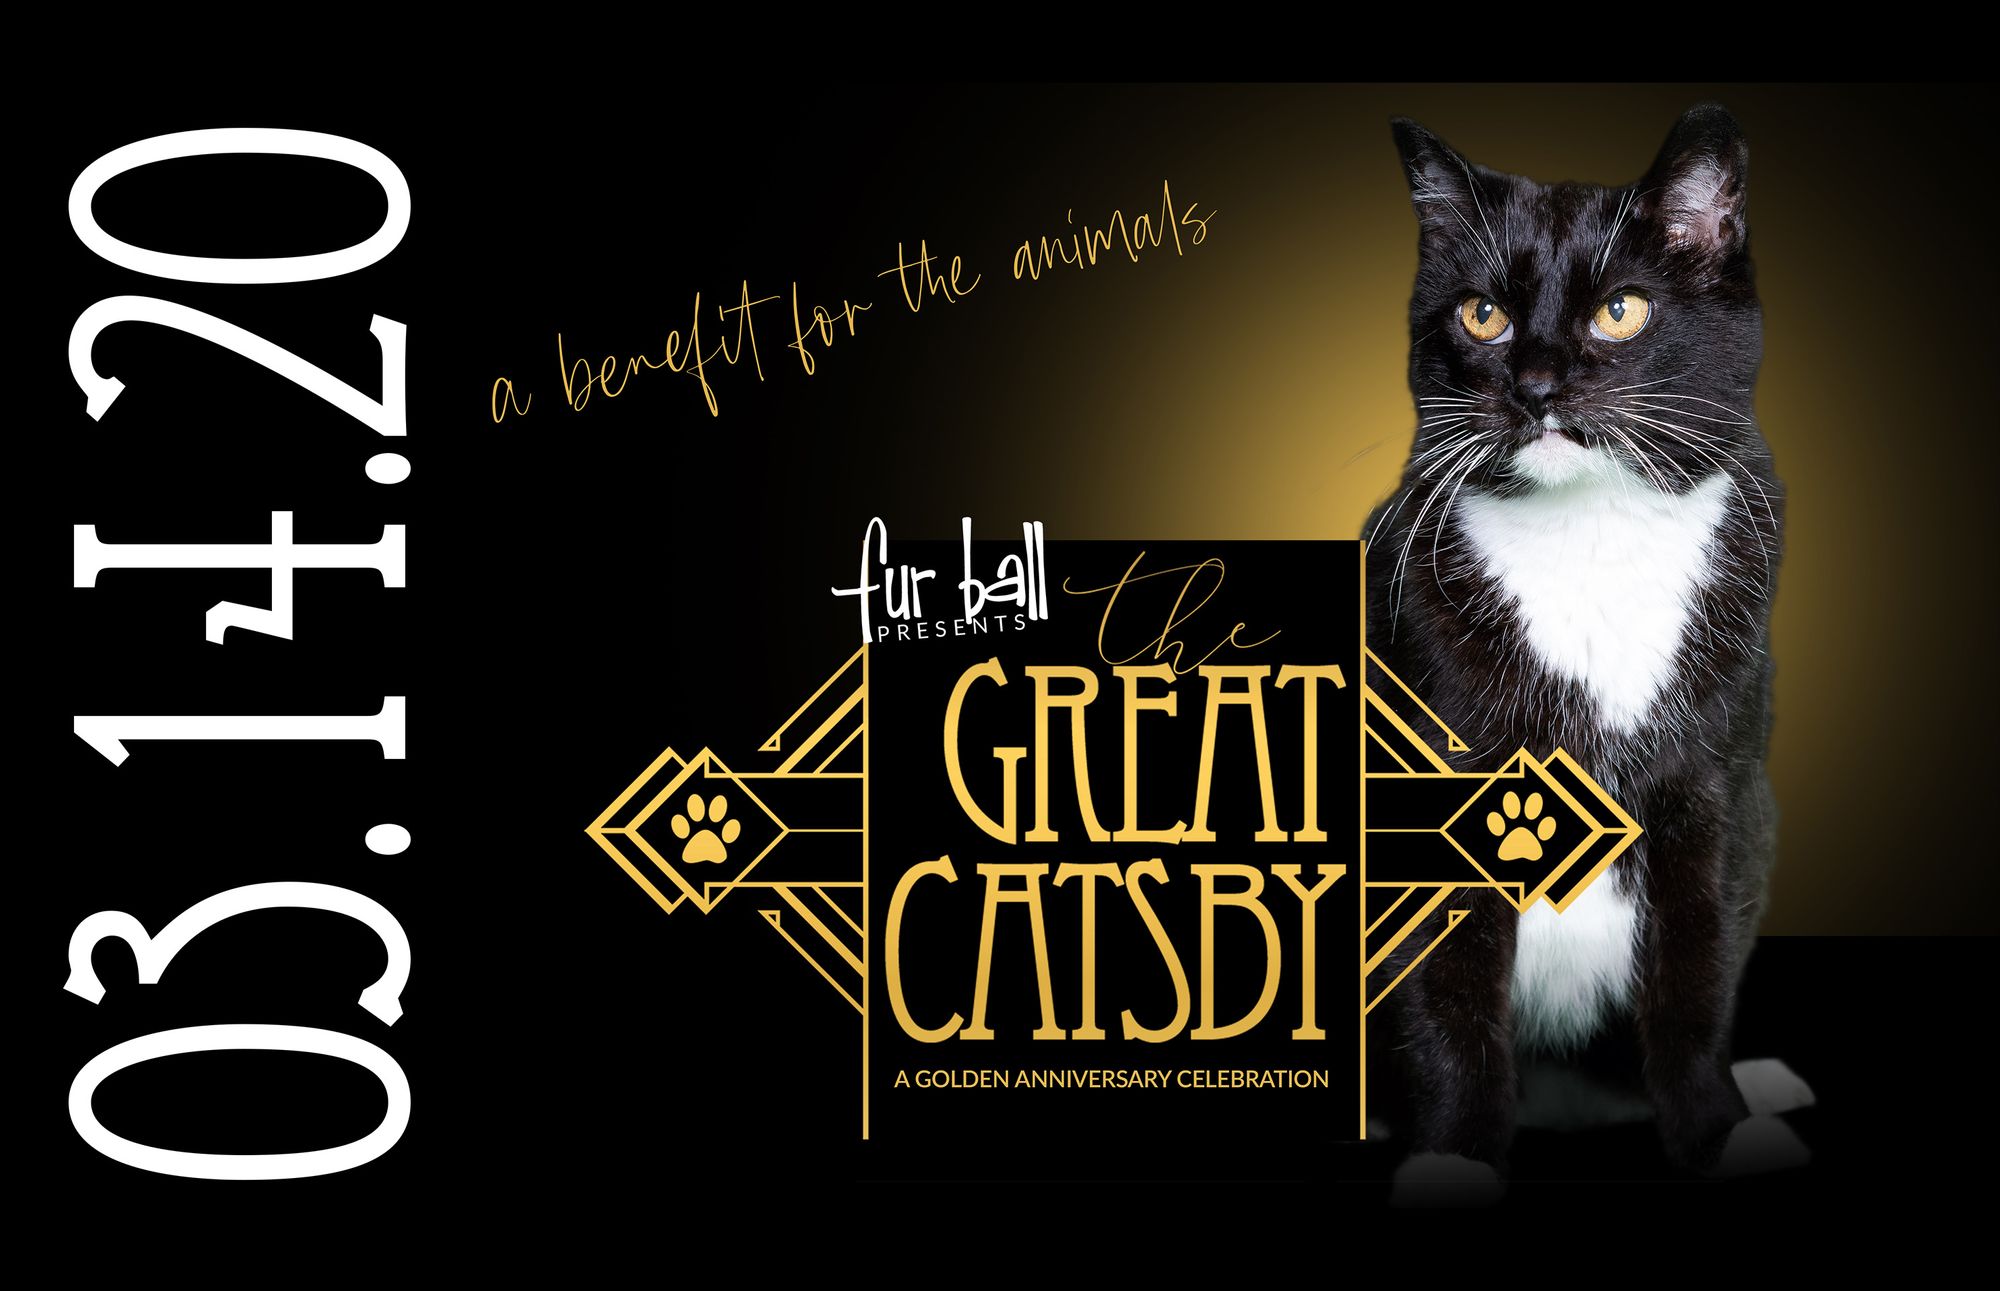 Fur Ball Presents "The Great Catsby" This Saturday